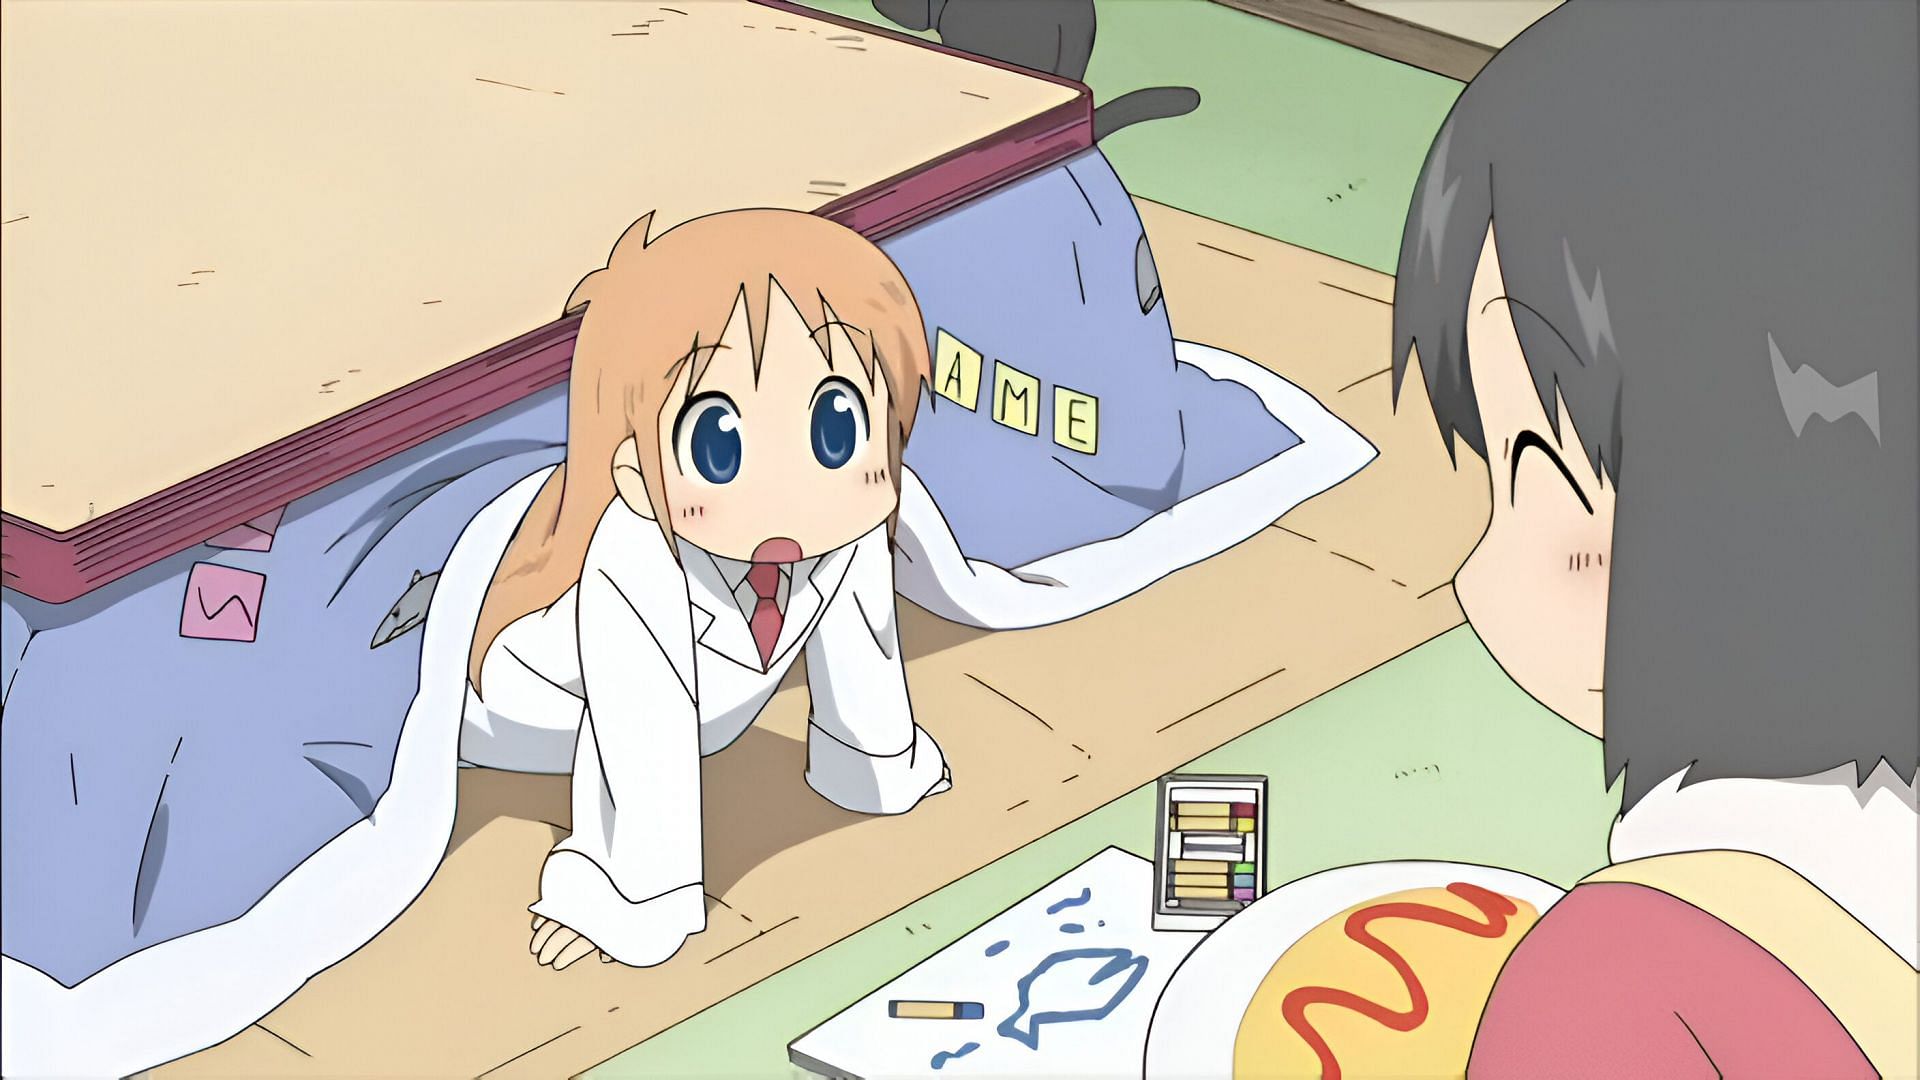 Hakase (left) and Nano (right) as seen in the anime (Image via KyoAni)